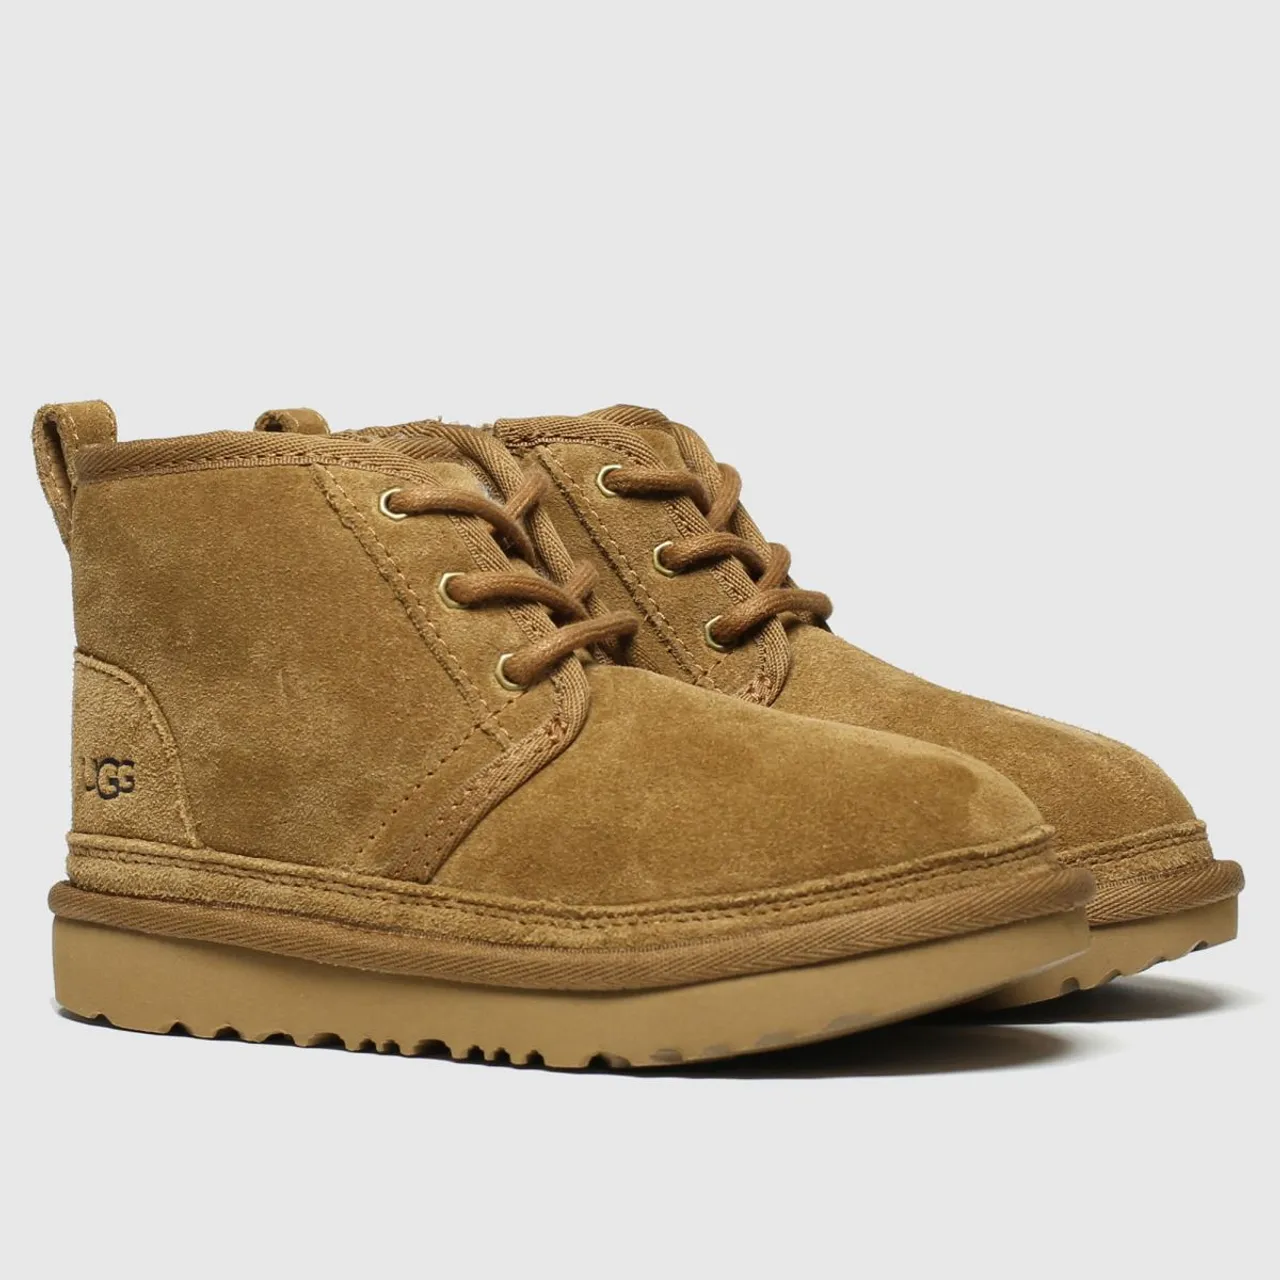 Ugg Tan Neumell Ii Boys Toddler Boots